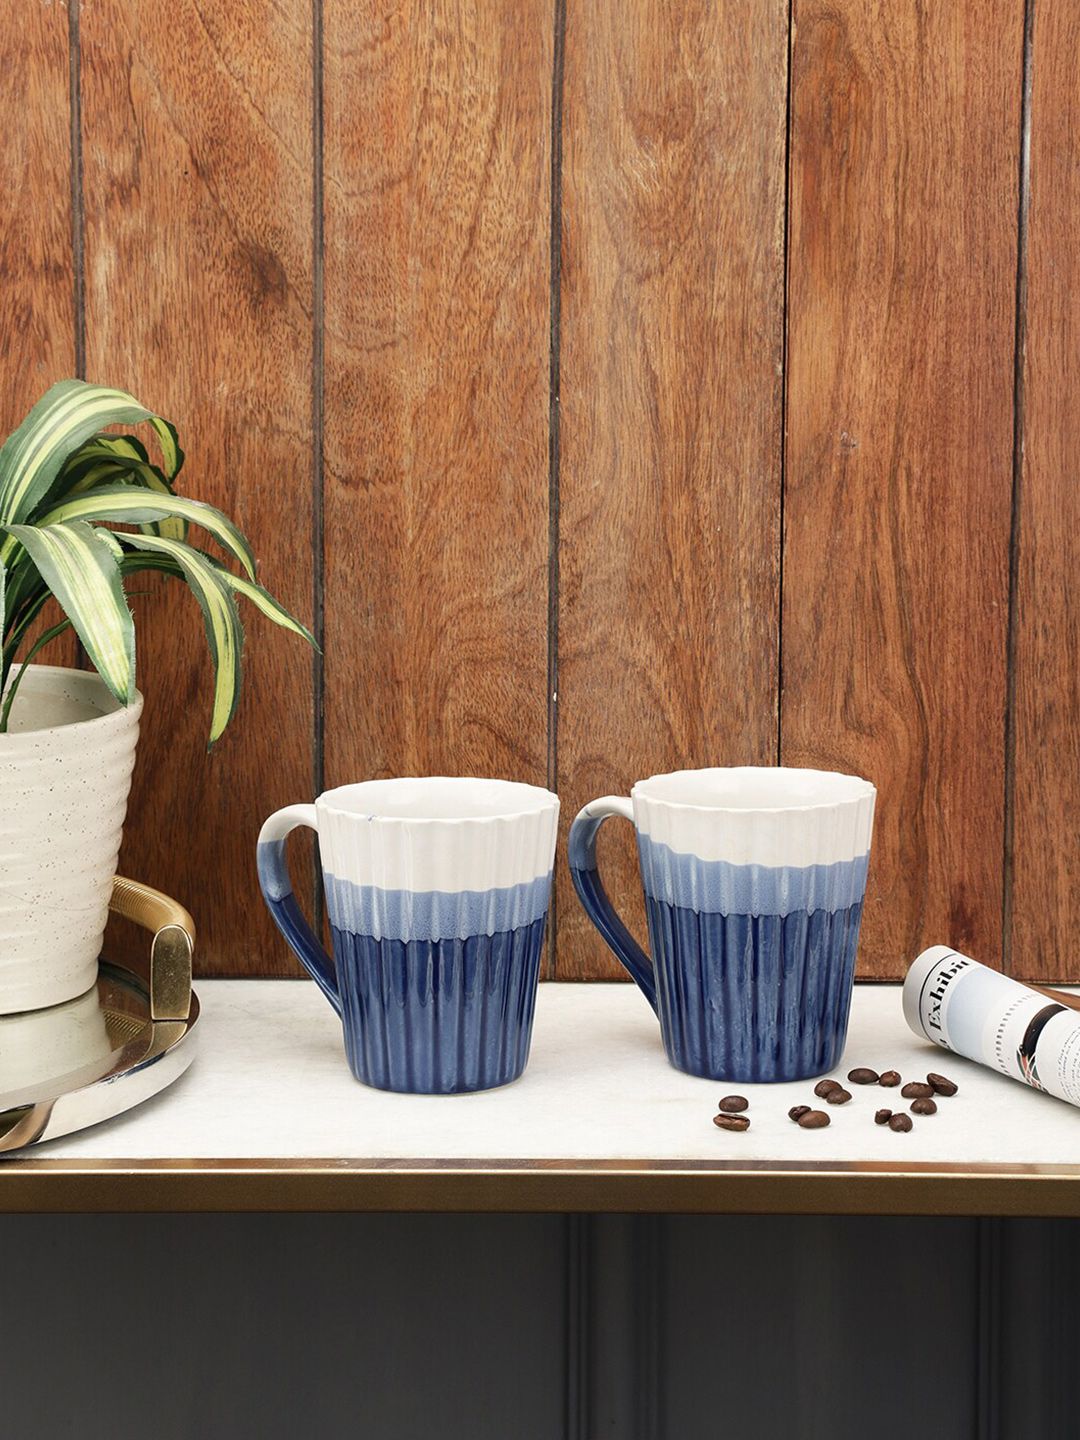 VarEesha Blue & White Handcrafted and Hand Painted Textured Ceramic Glossy Mugs Set of Cups and Mugs Price in India